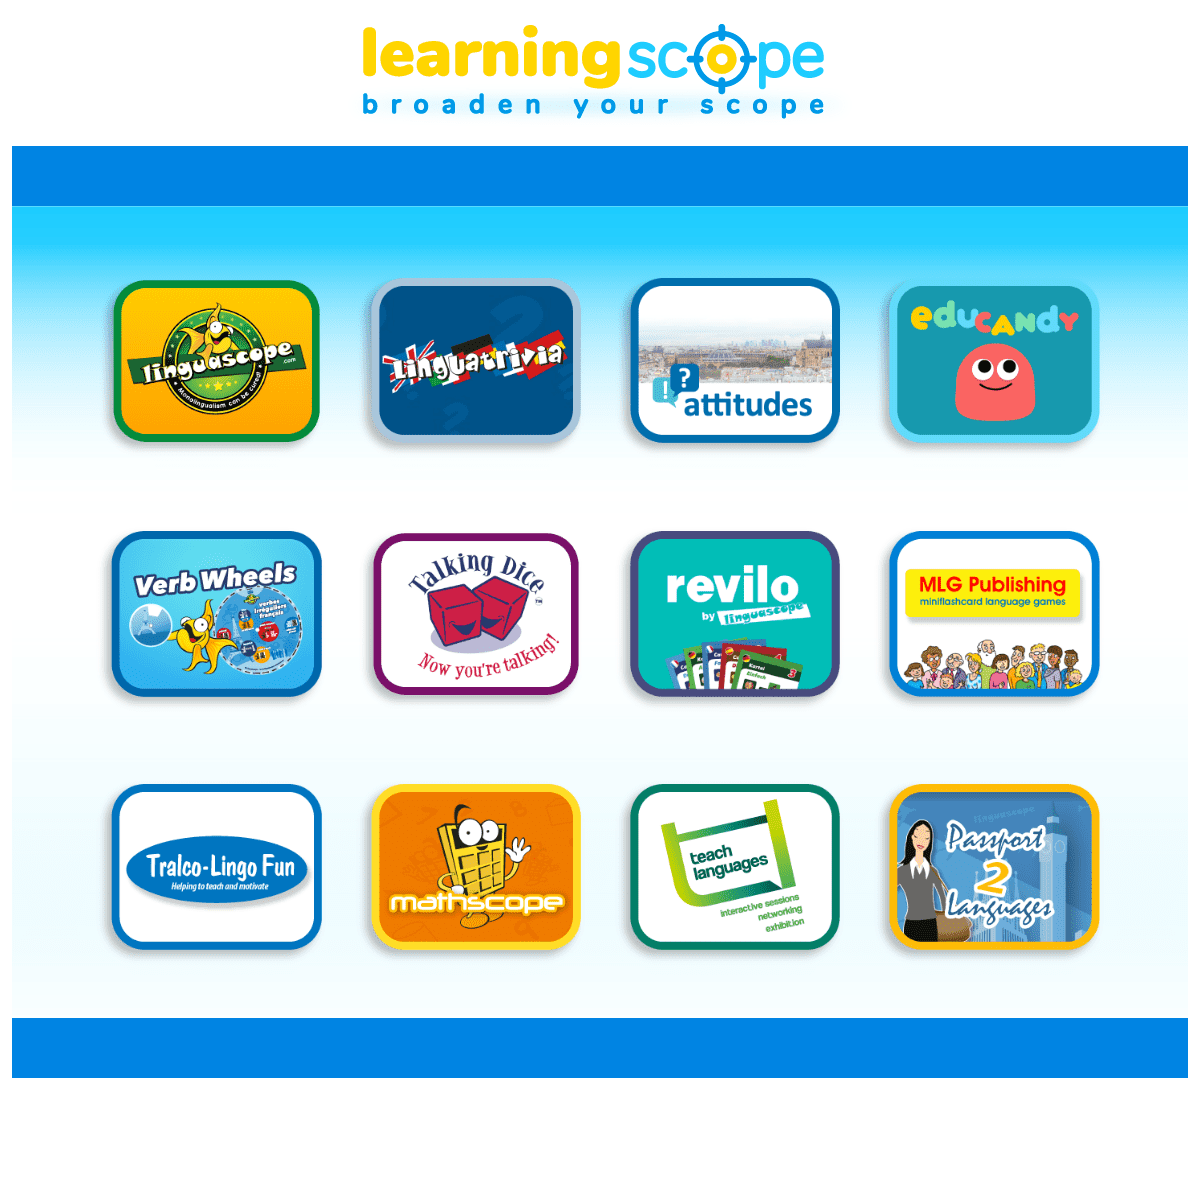 A complete backup of learningscope.com